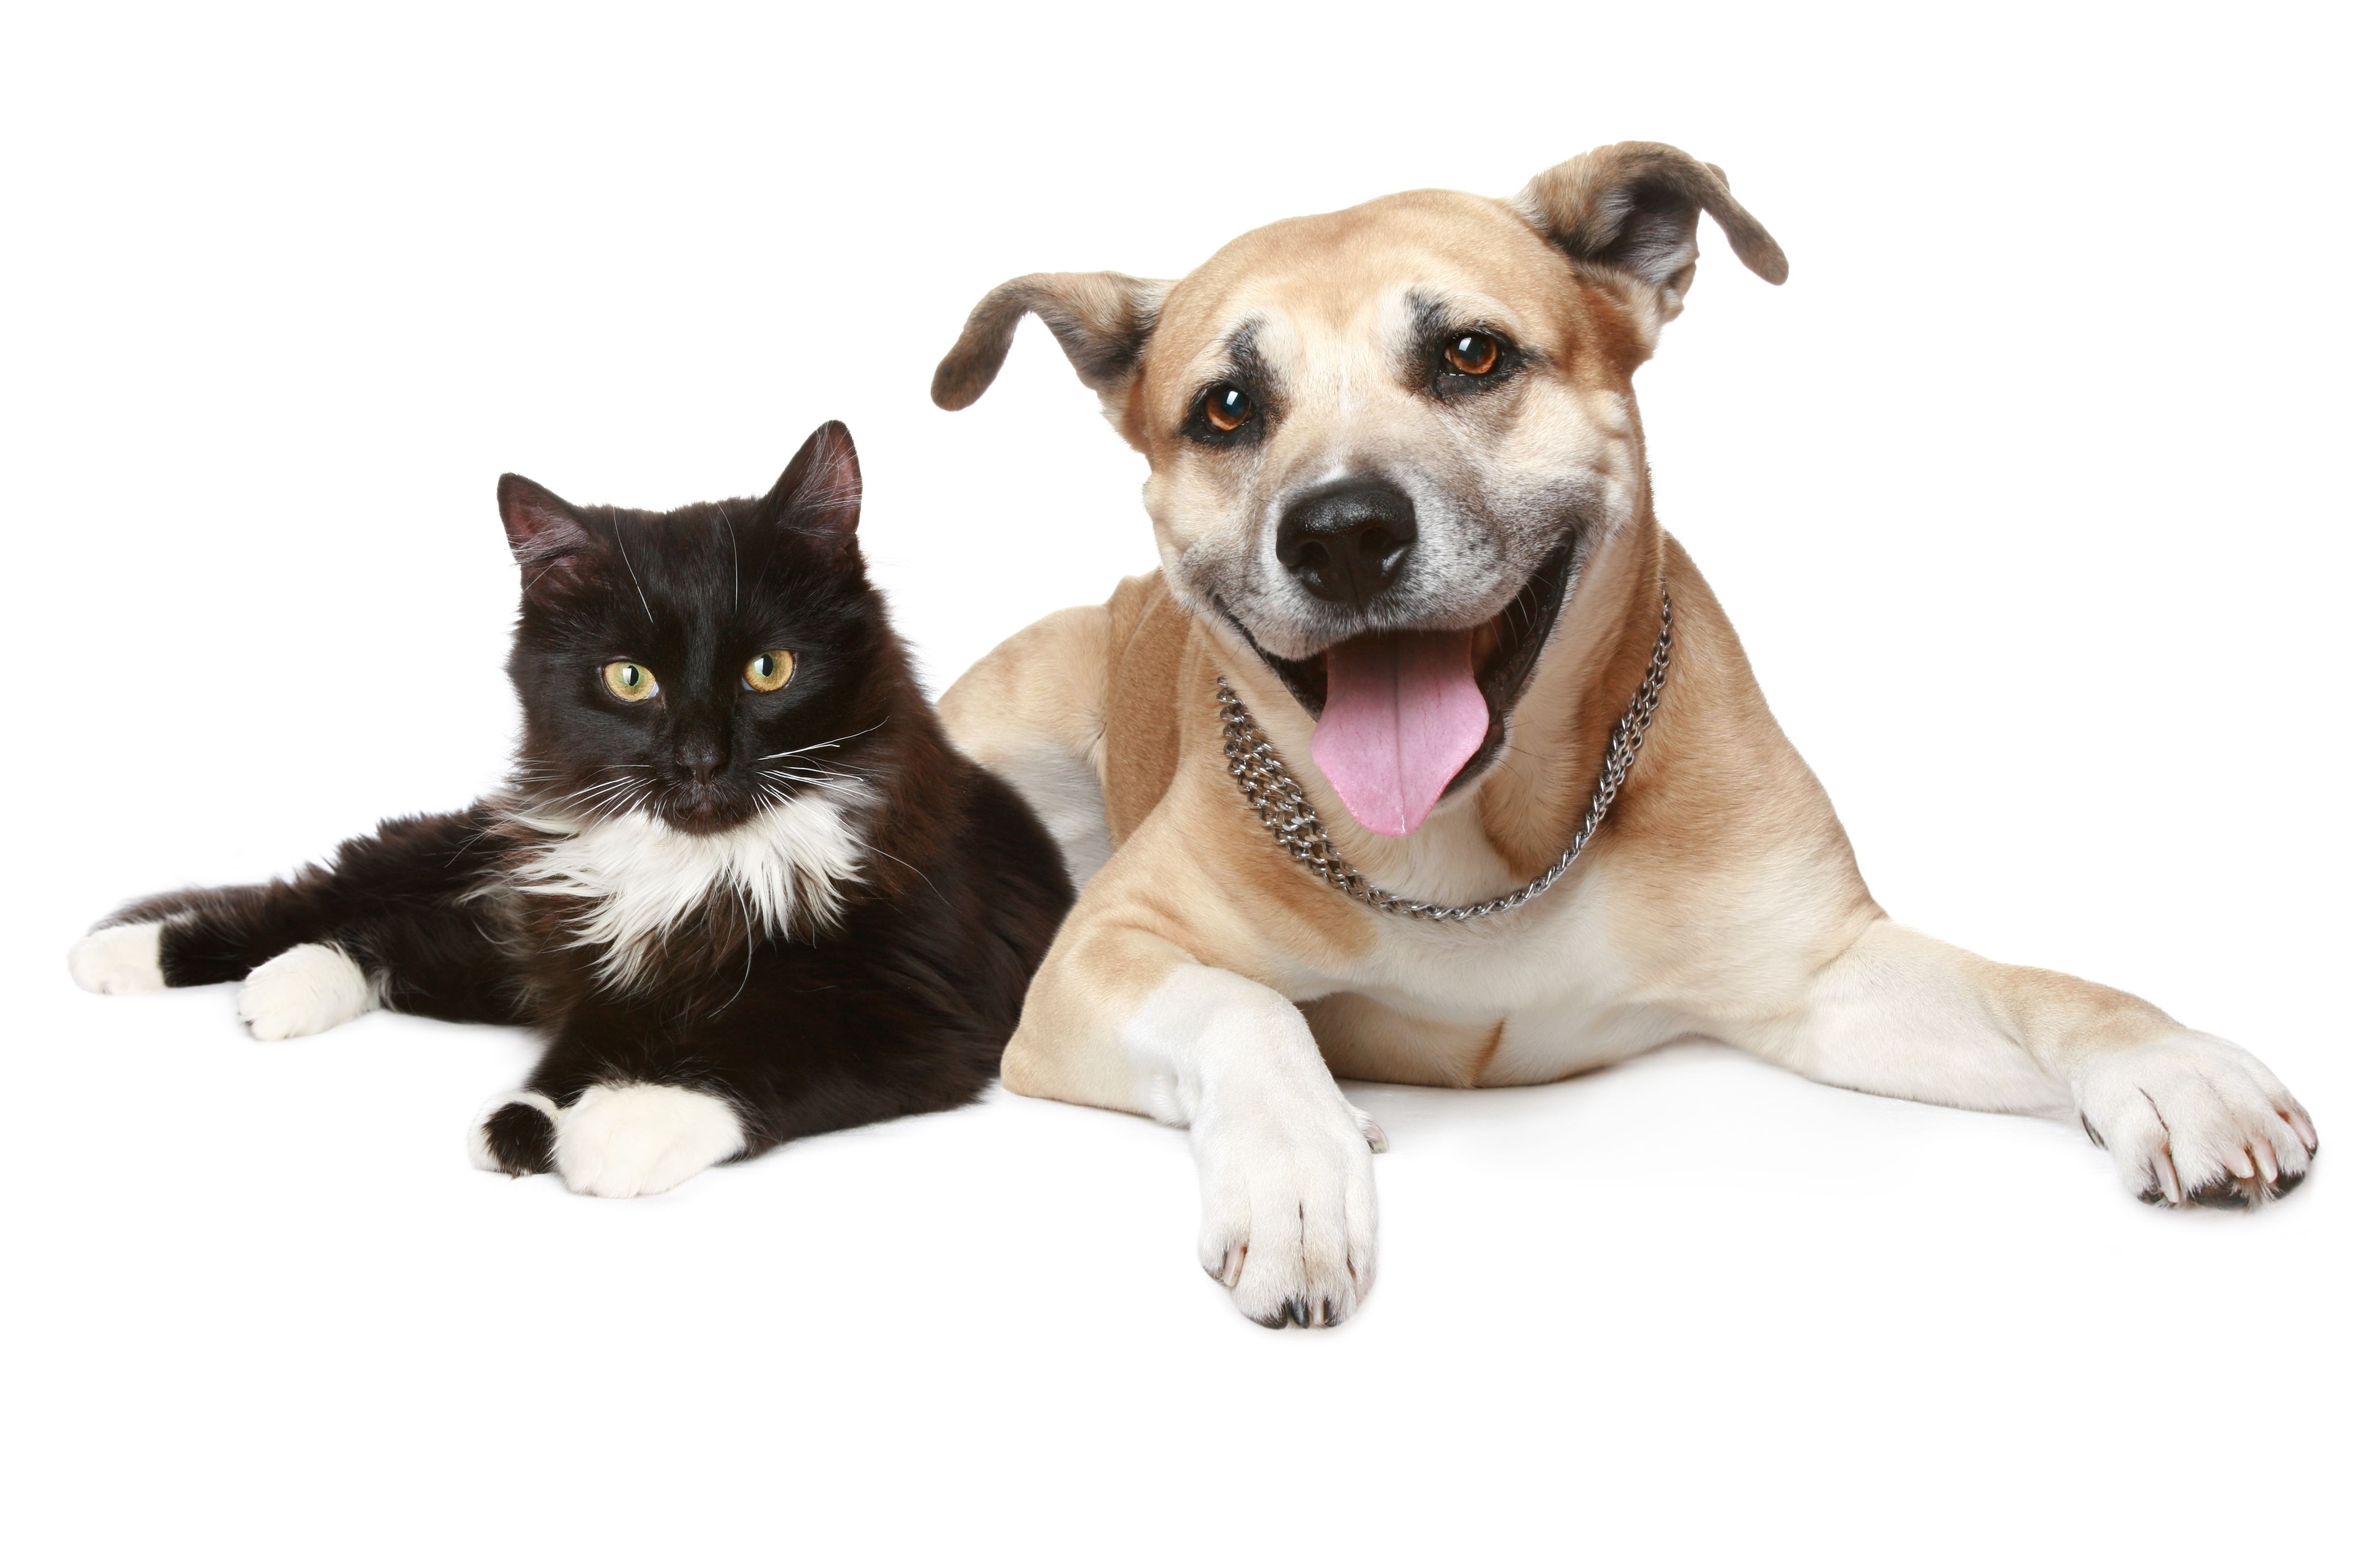 Happy National Pet Day! 'Why We Love Cats and Dogs' is available